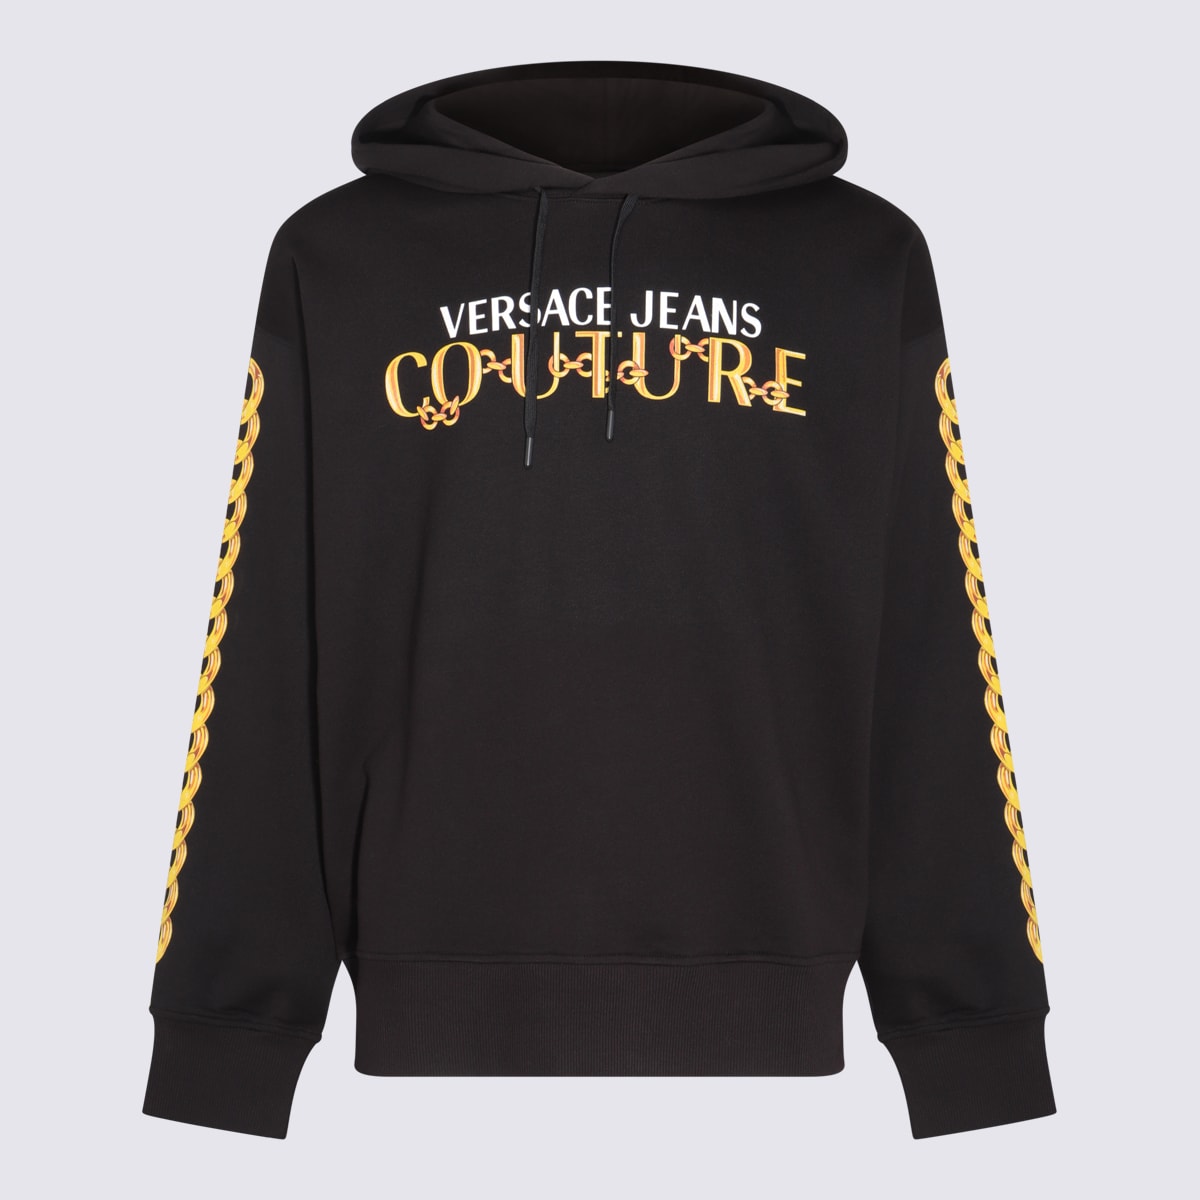 Shop Versace Jeans Couture Black, Yellow And White Cotton Sweatshirt